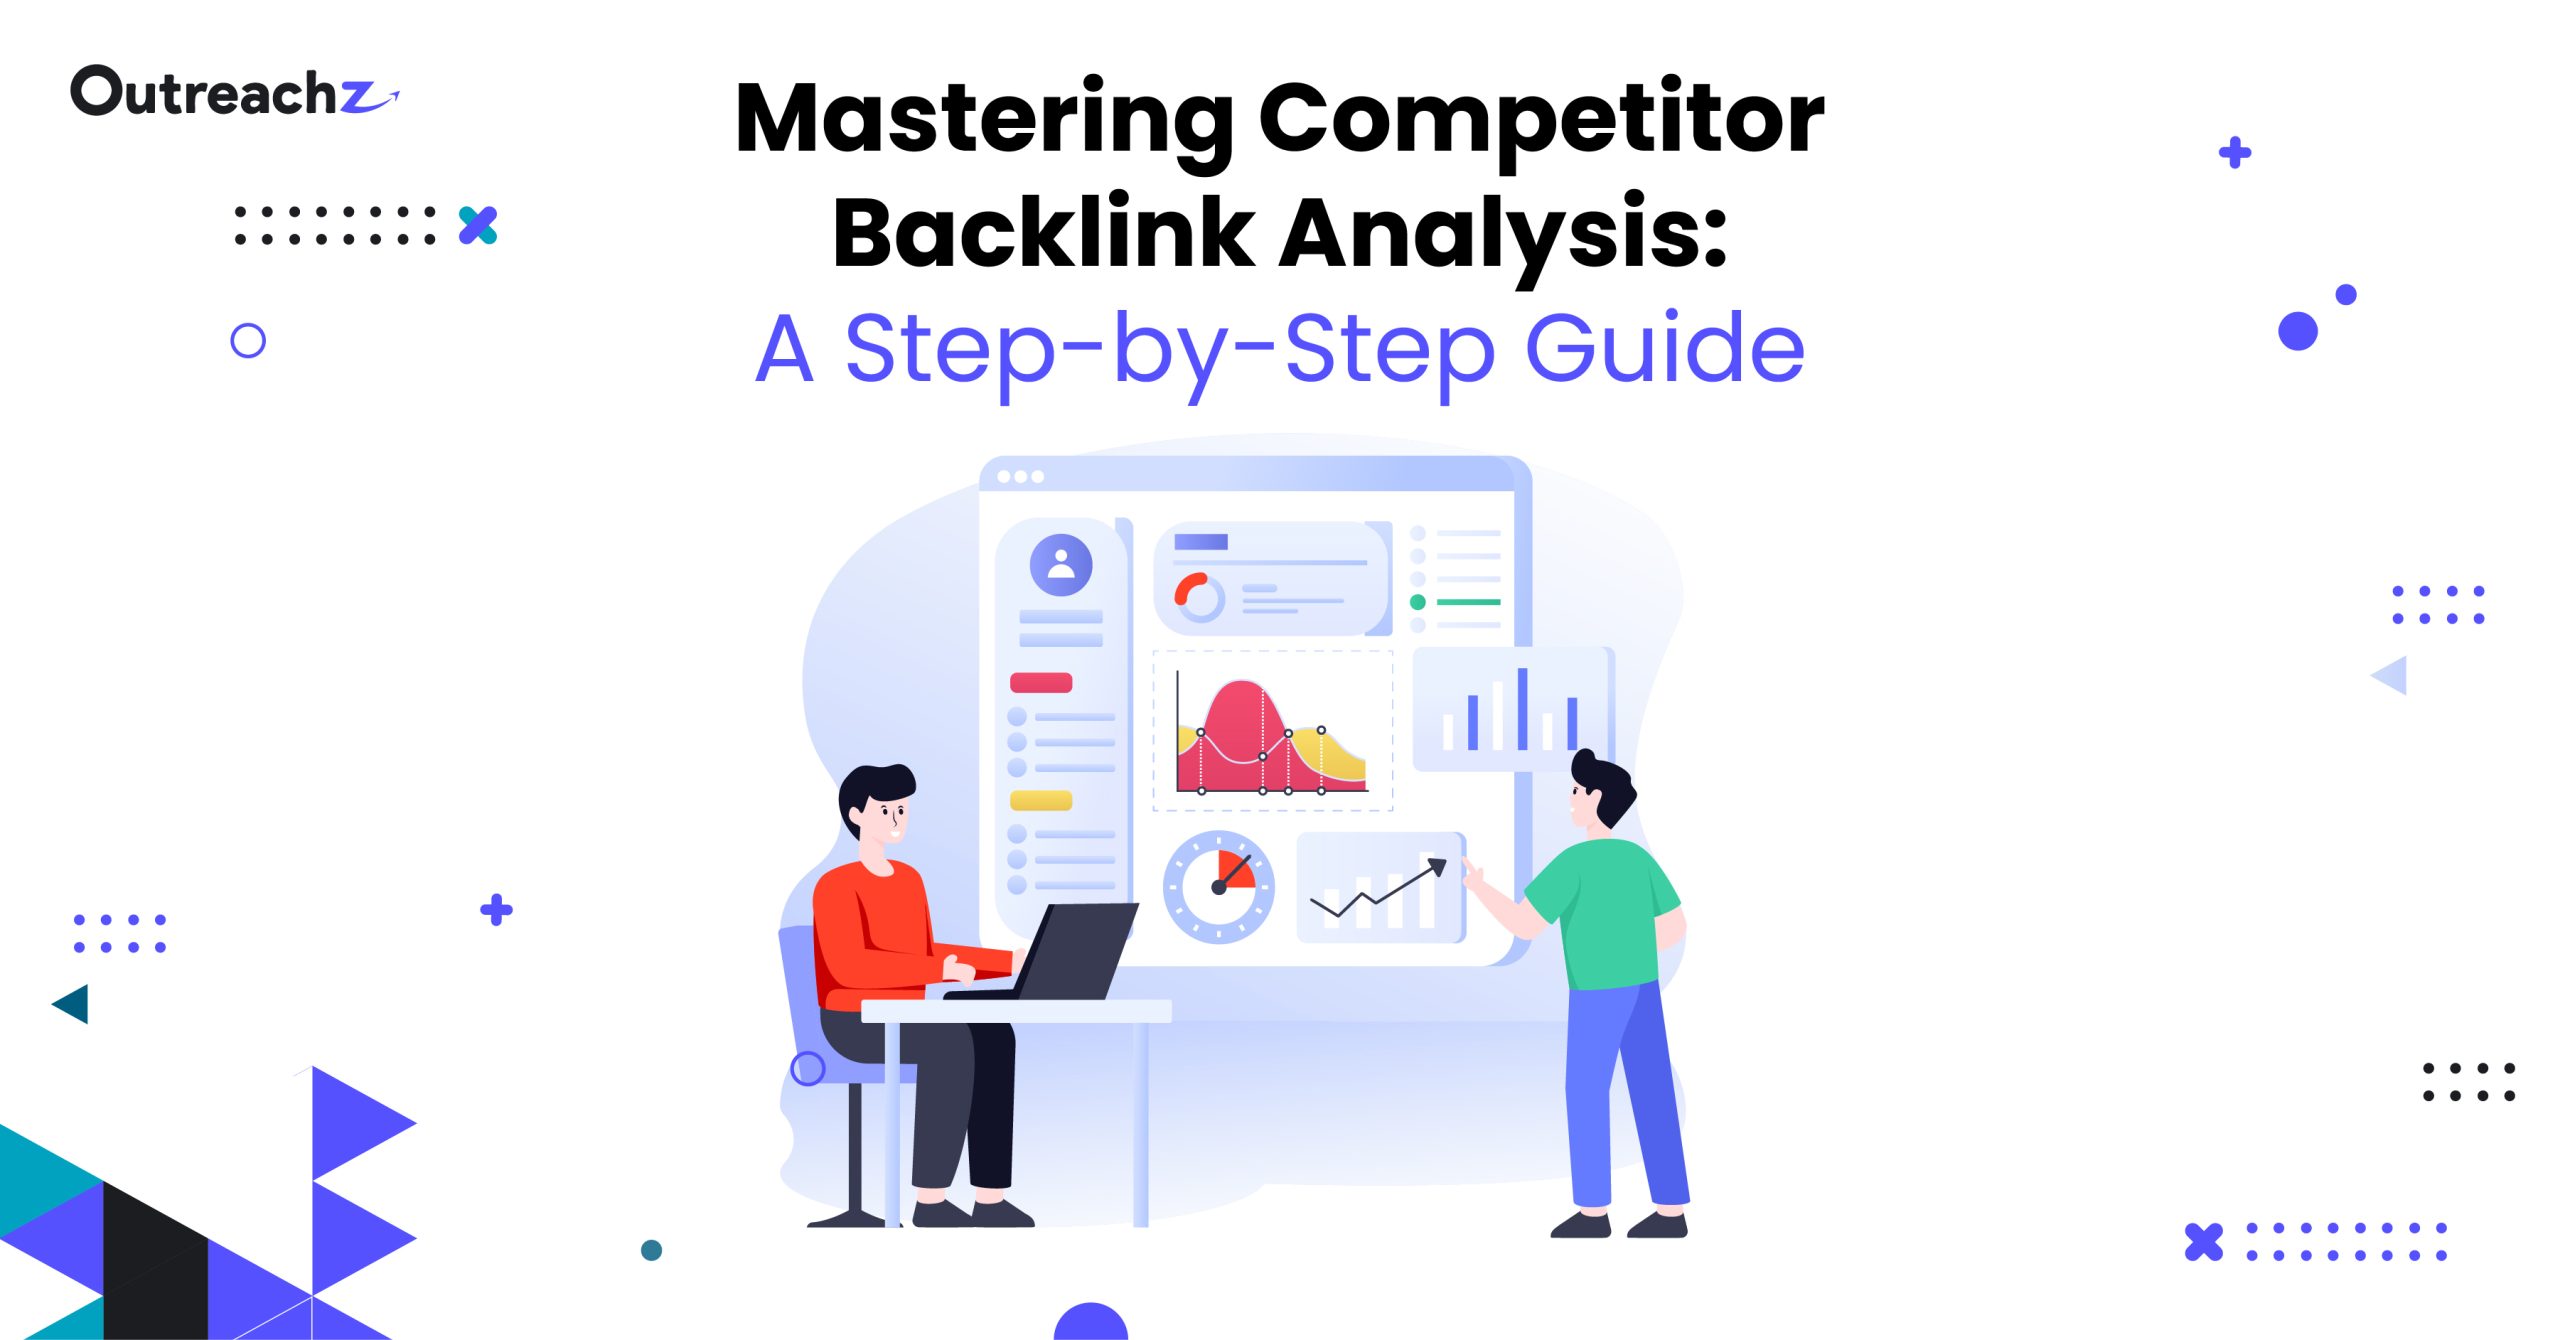 Mastering Competitor Backlink Analysis: A Step-by-Step Guide